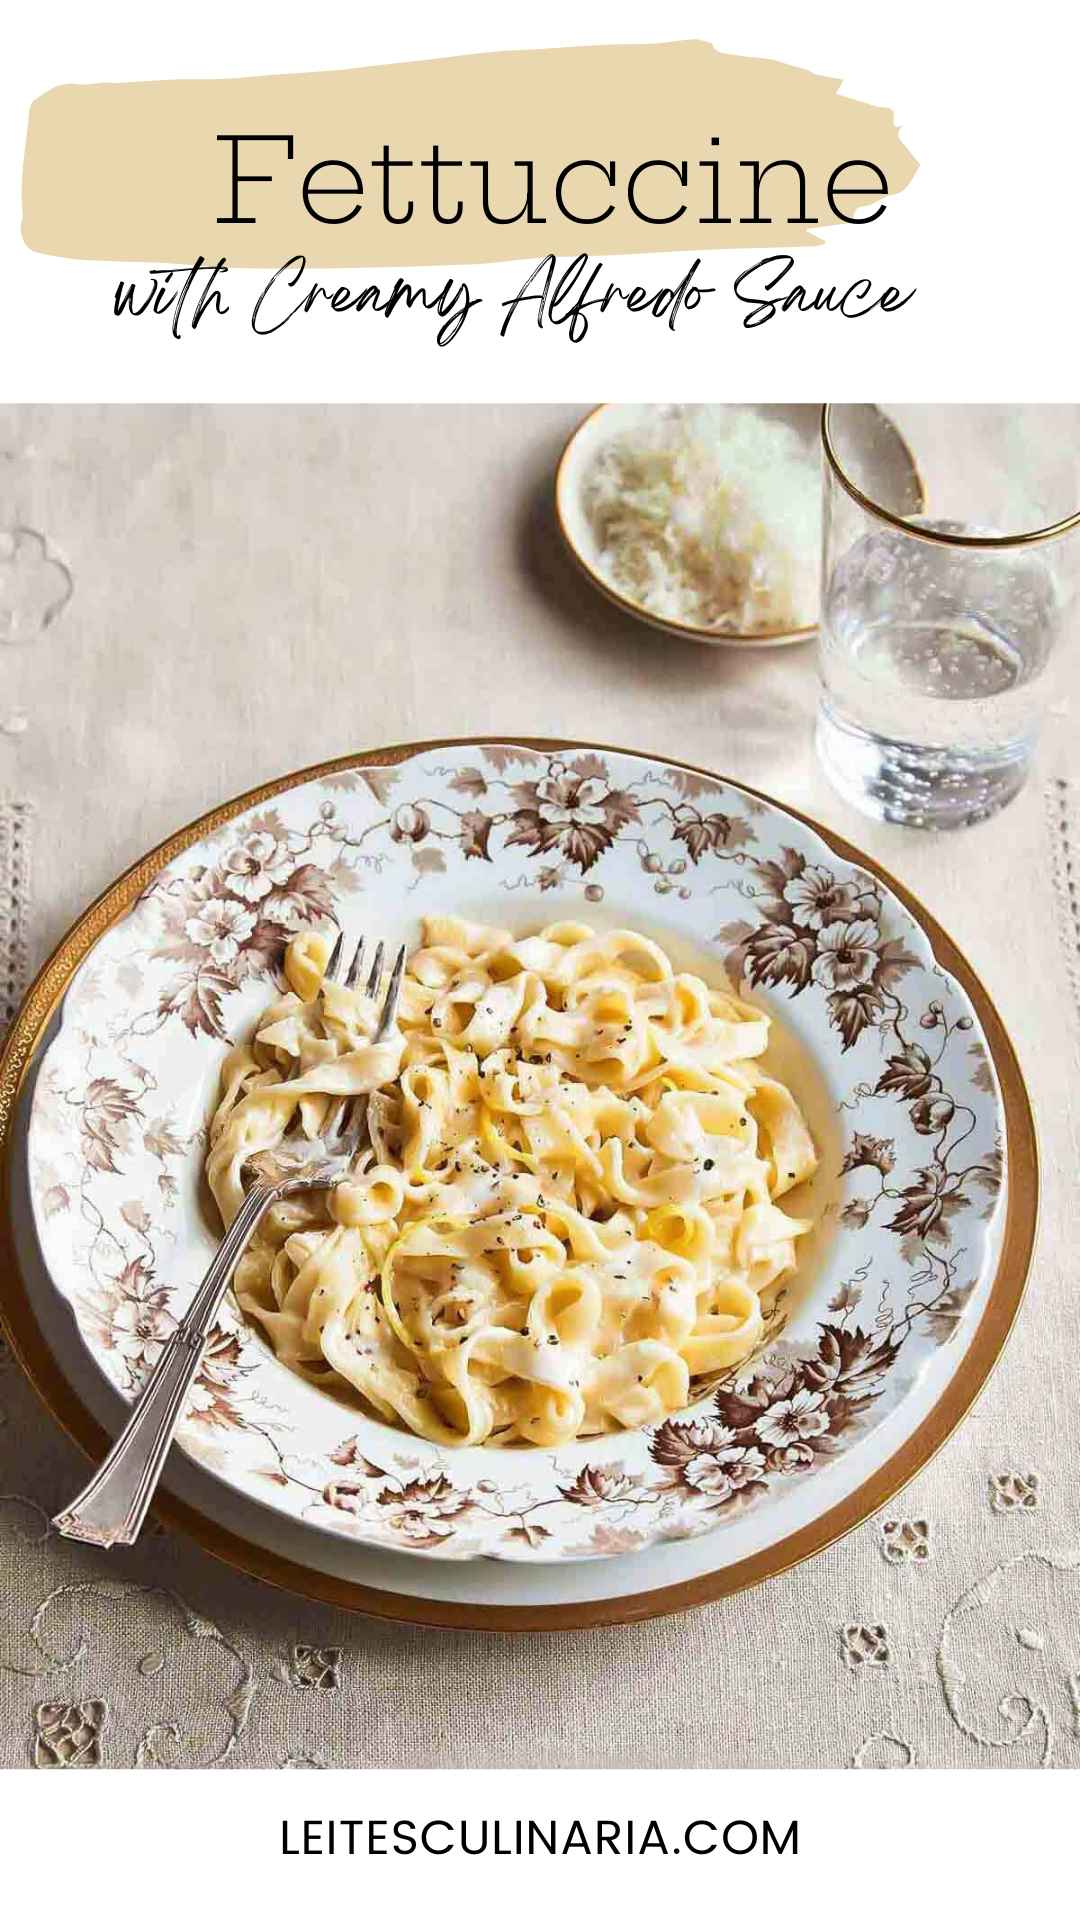 A tangle of fettuccine noodles in Alfredo sauce with lemon zest garnish in a patterned bowl.